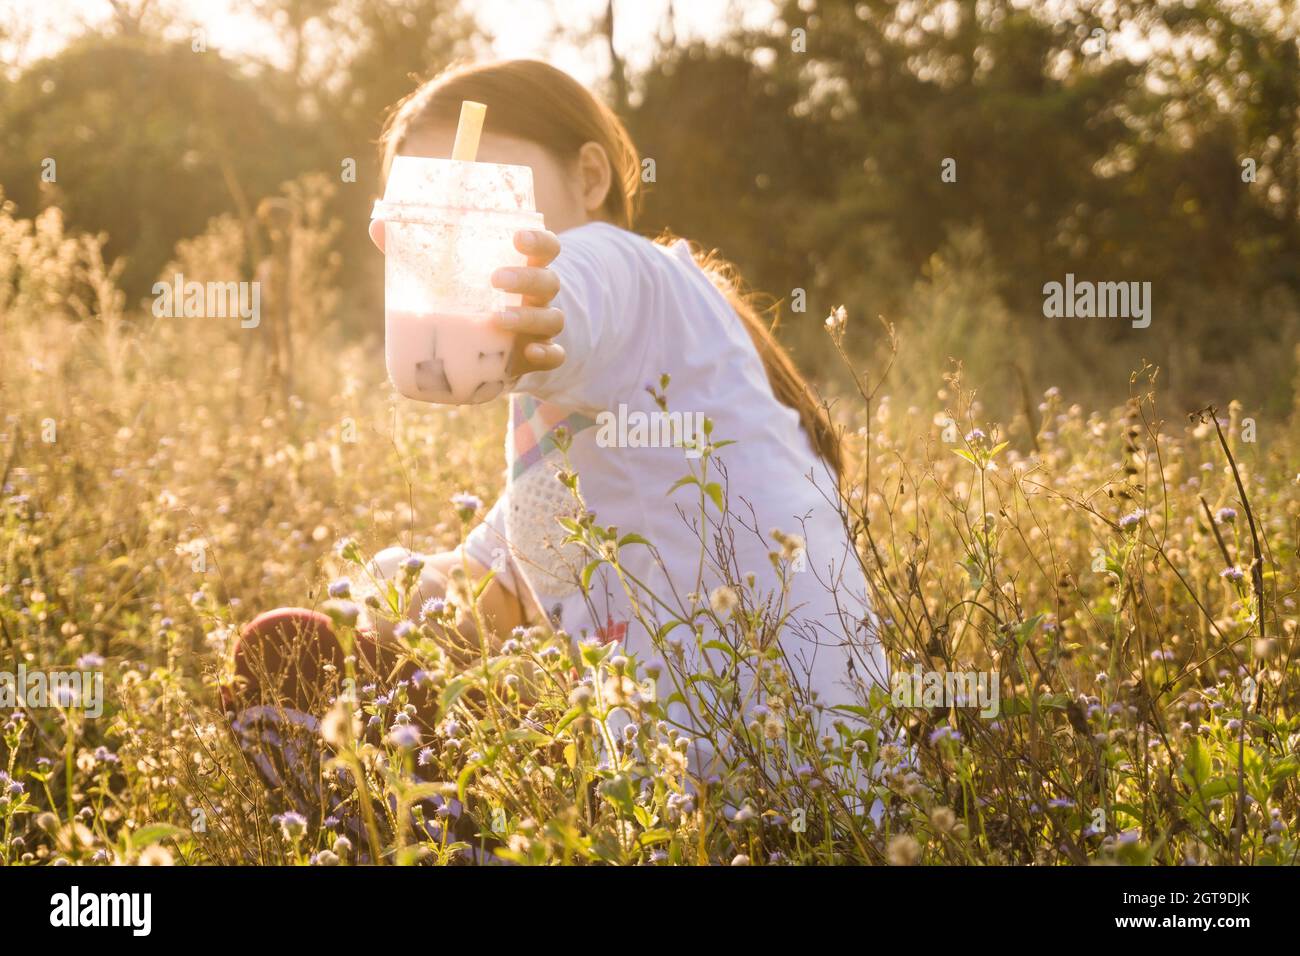 Woman Holding Smoothie In Glass On Field Stock Photo